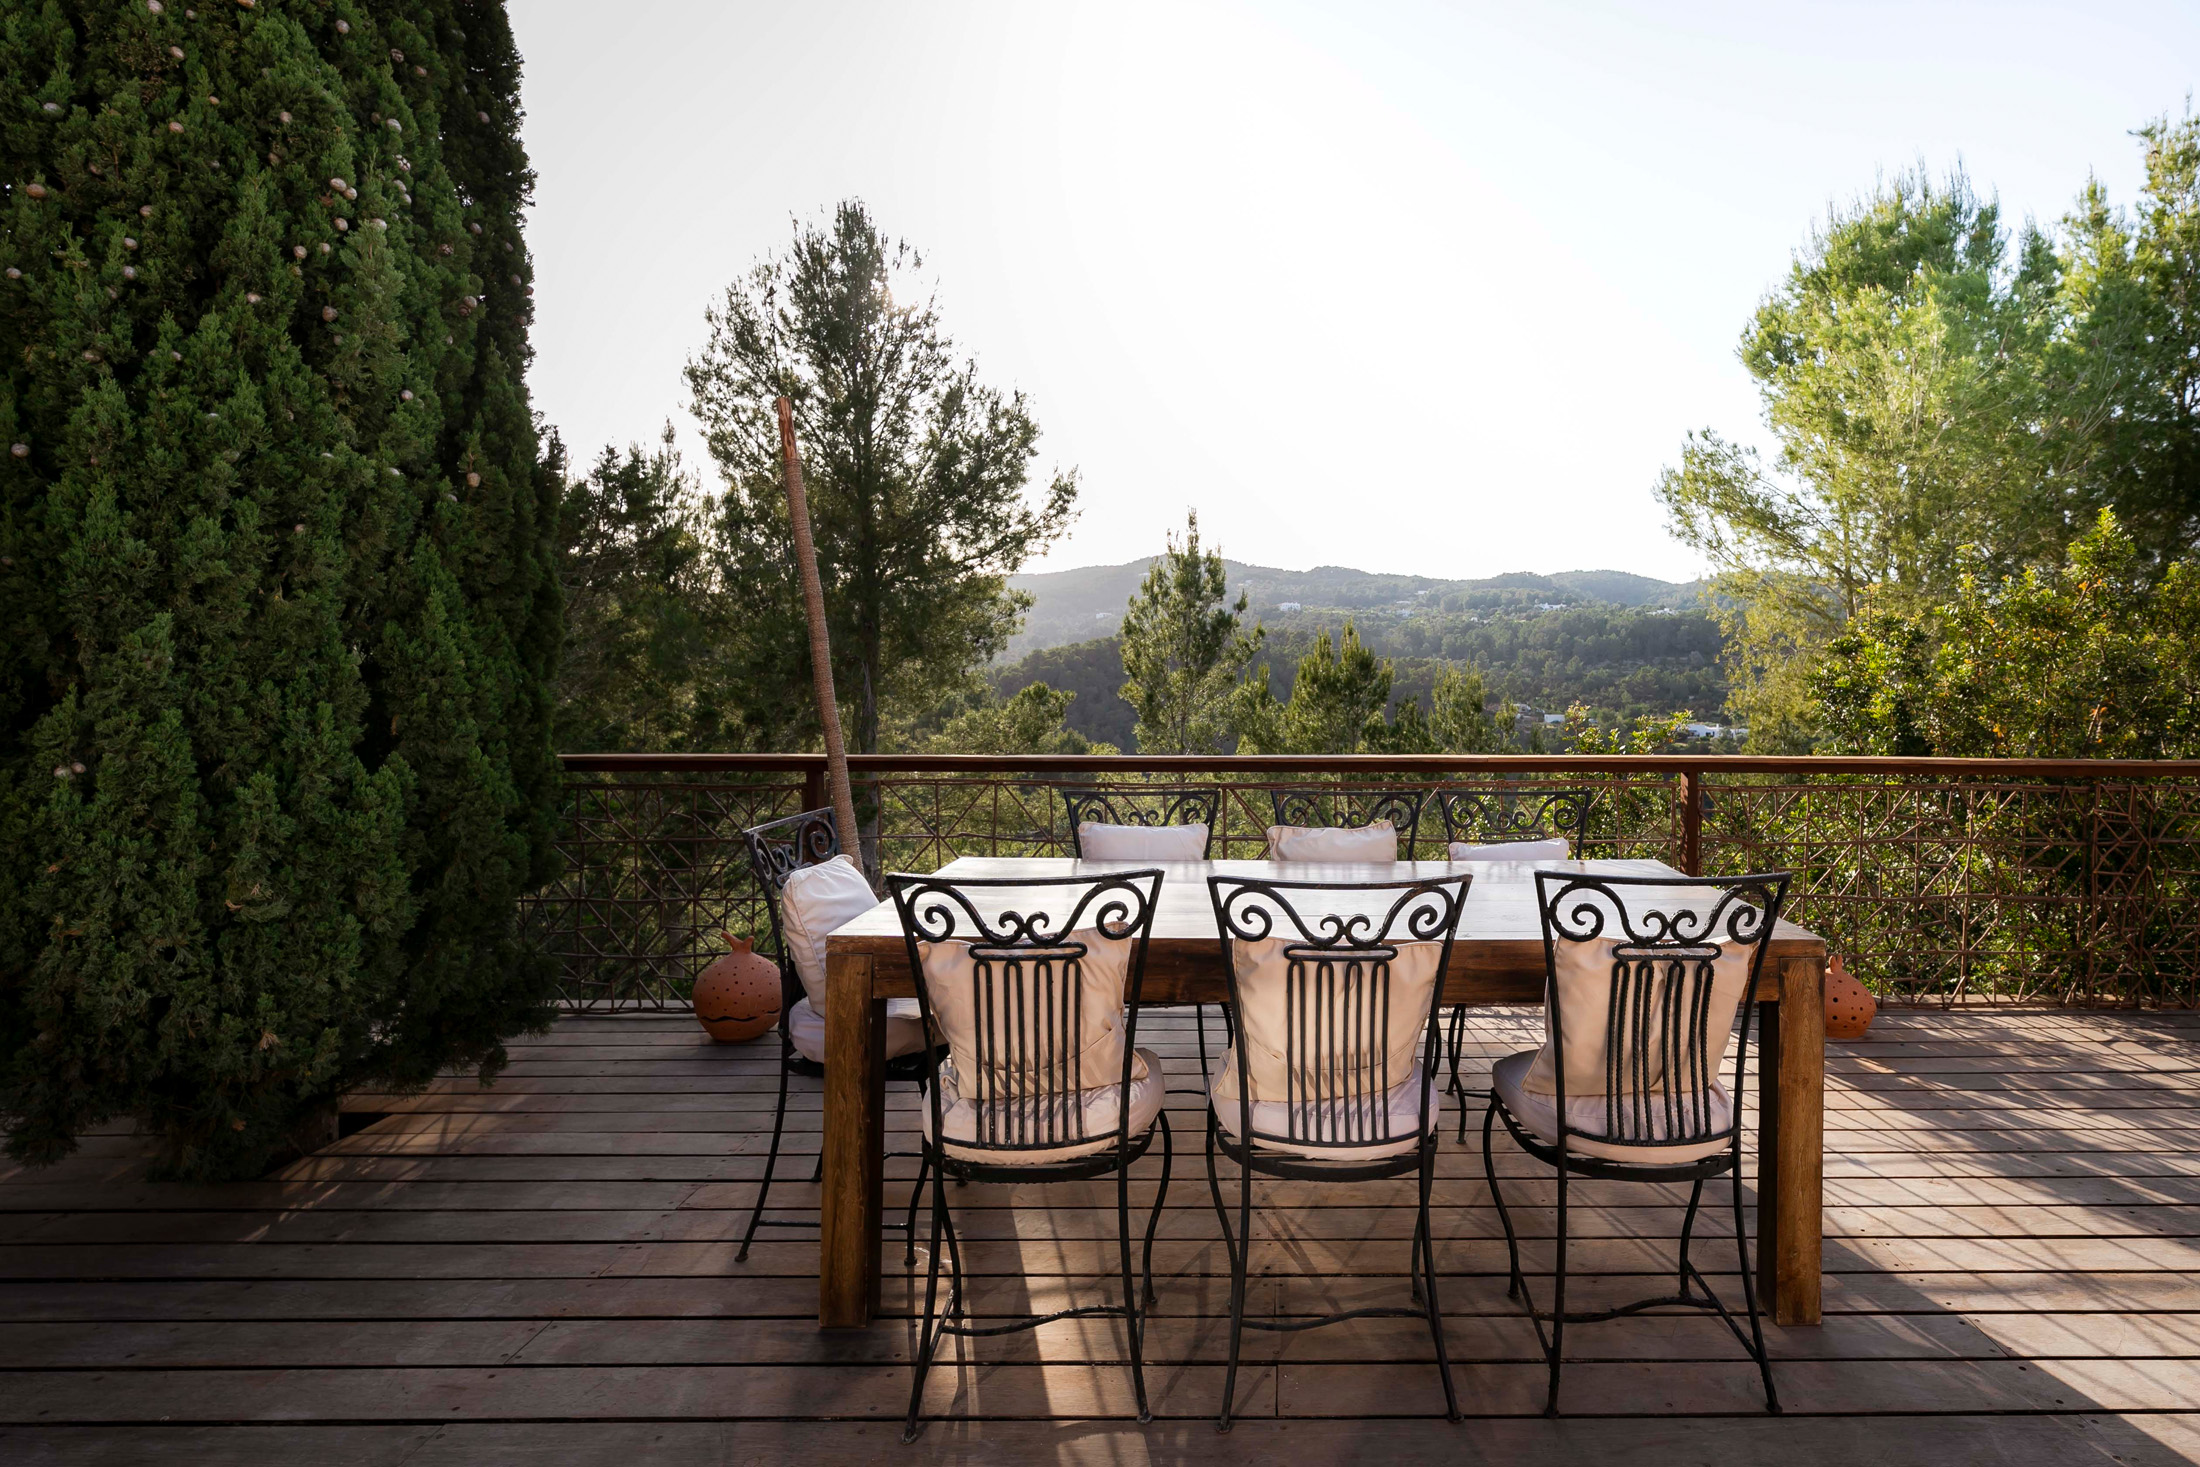 An outside dining area of a Spanish finca